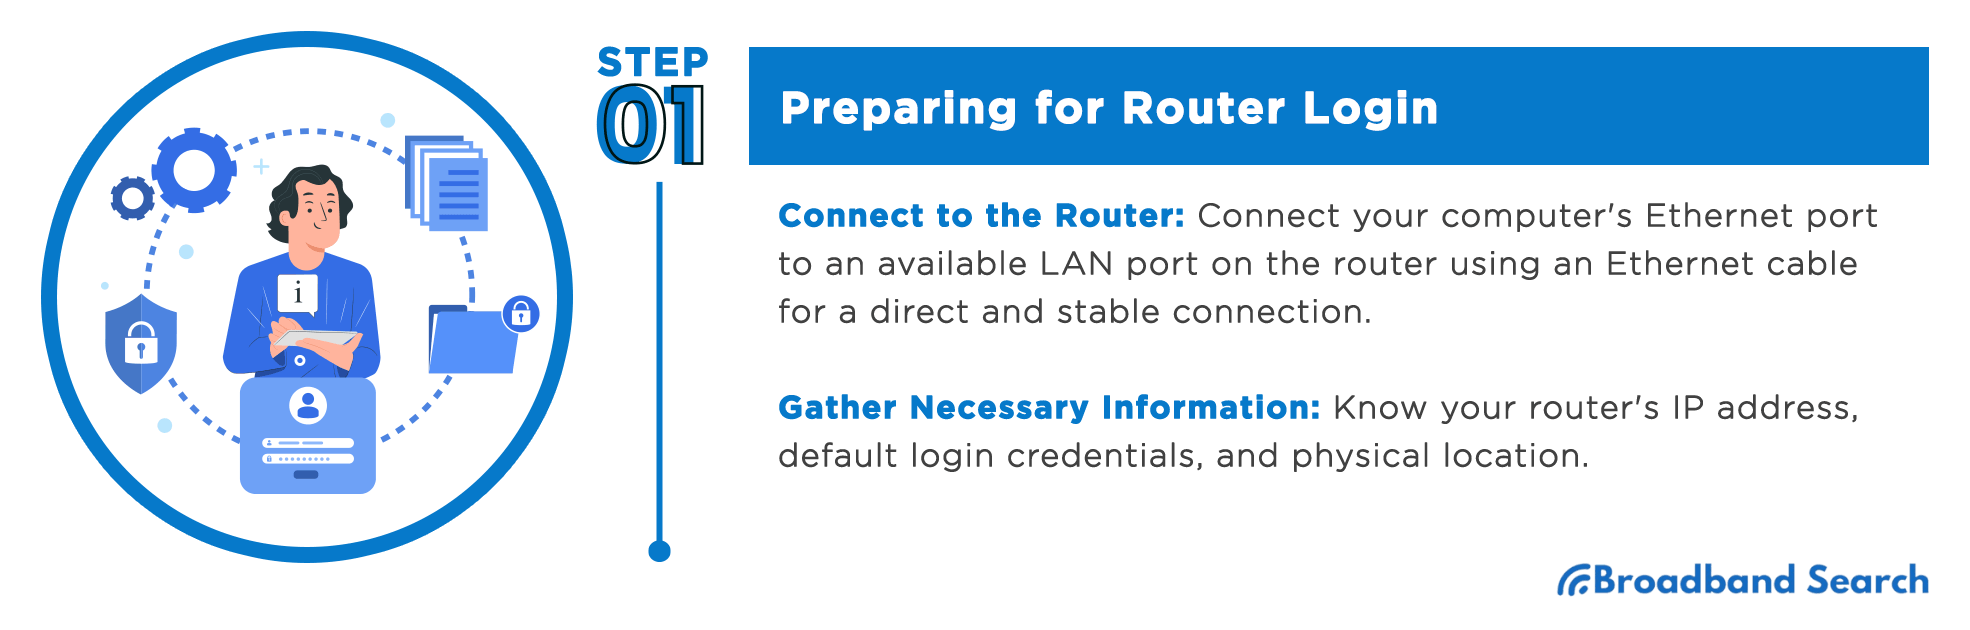 Instructions on how to prepare for router login